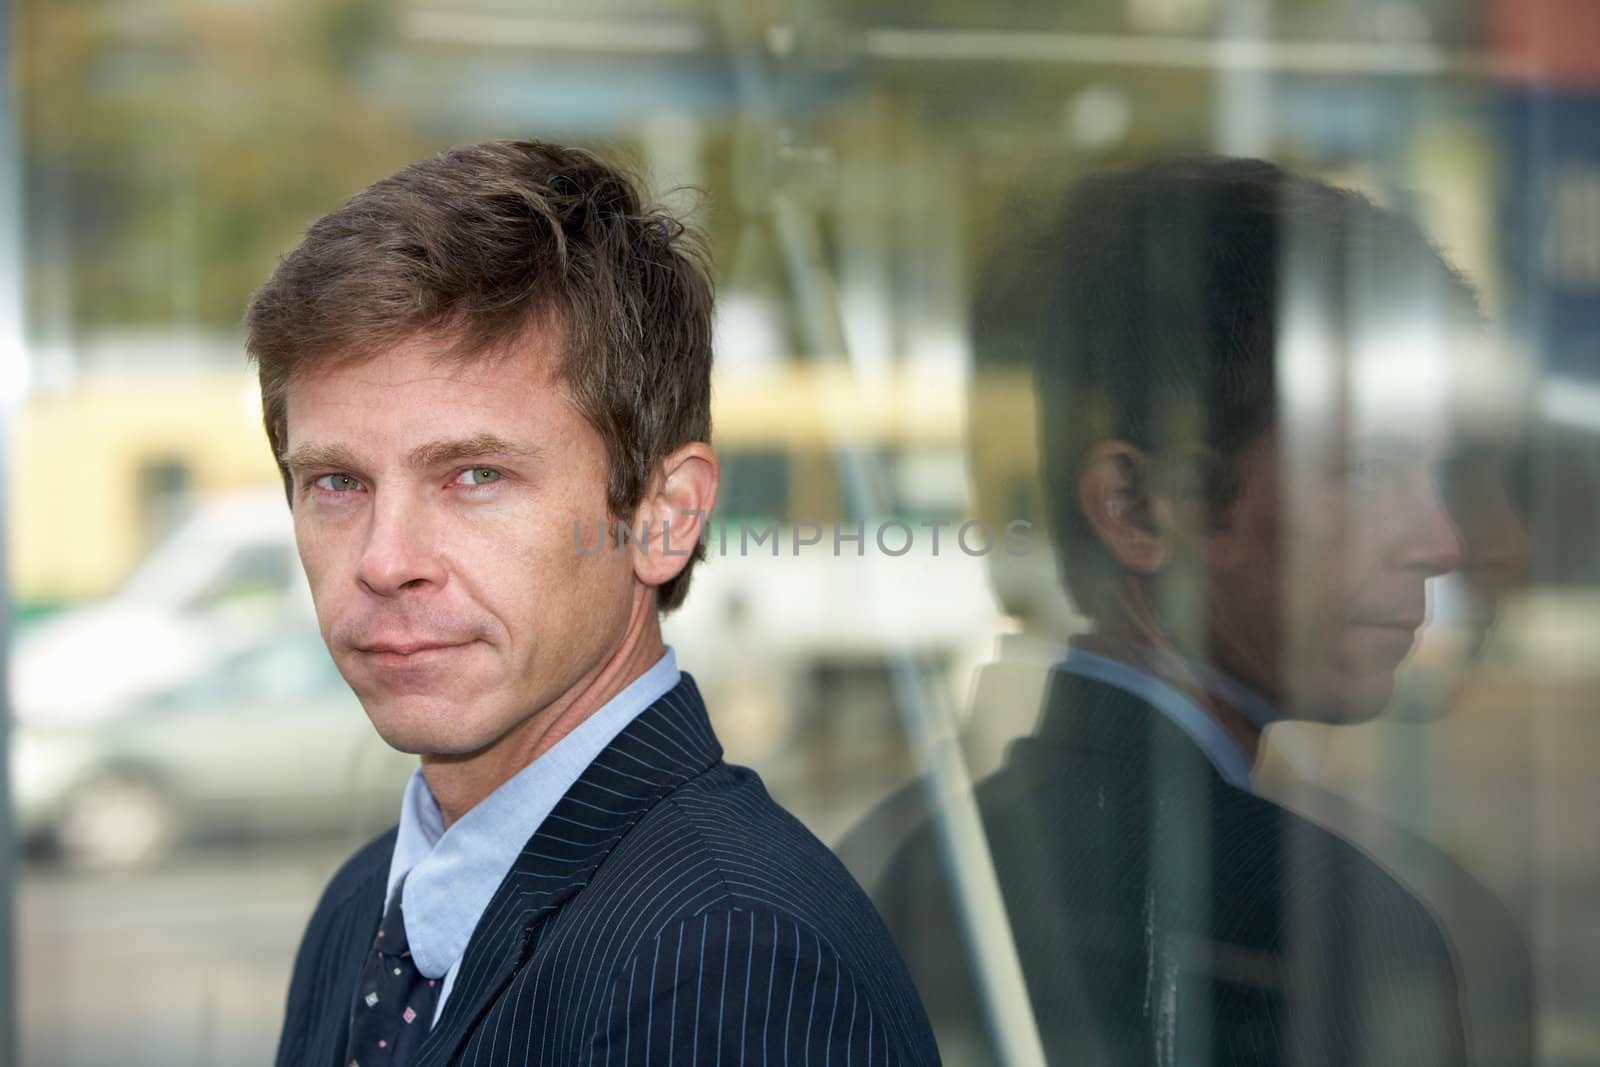 Man leaning against glass wall outdoors in city